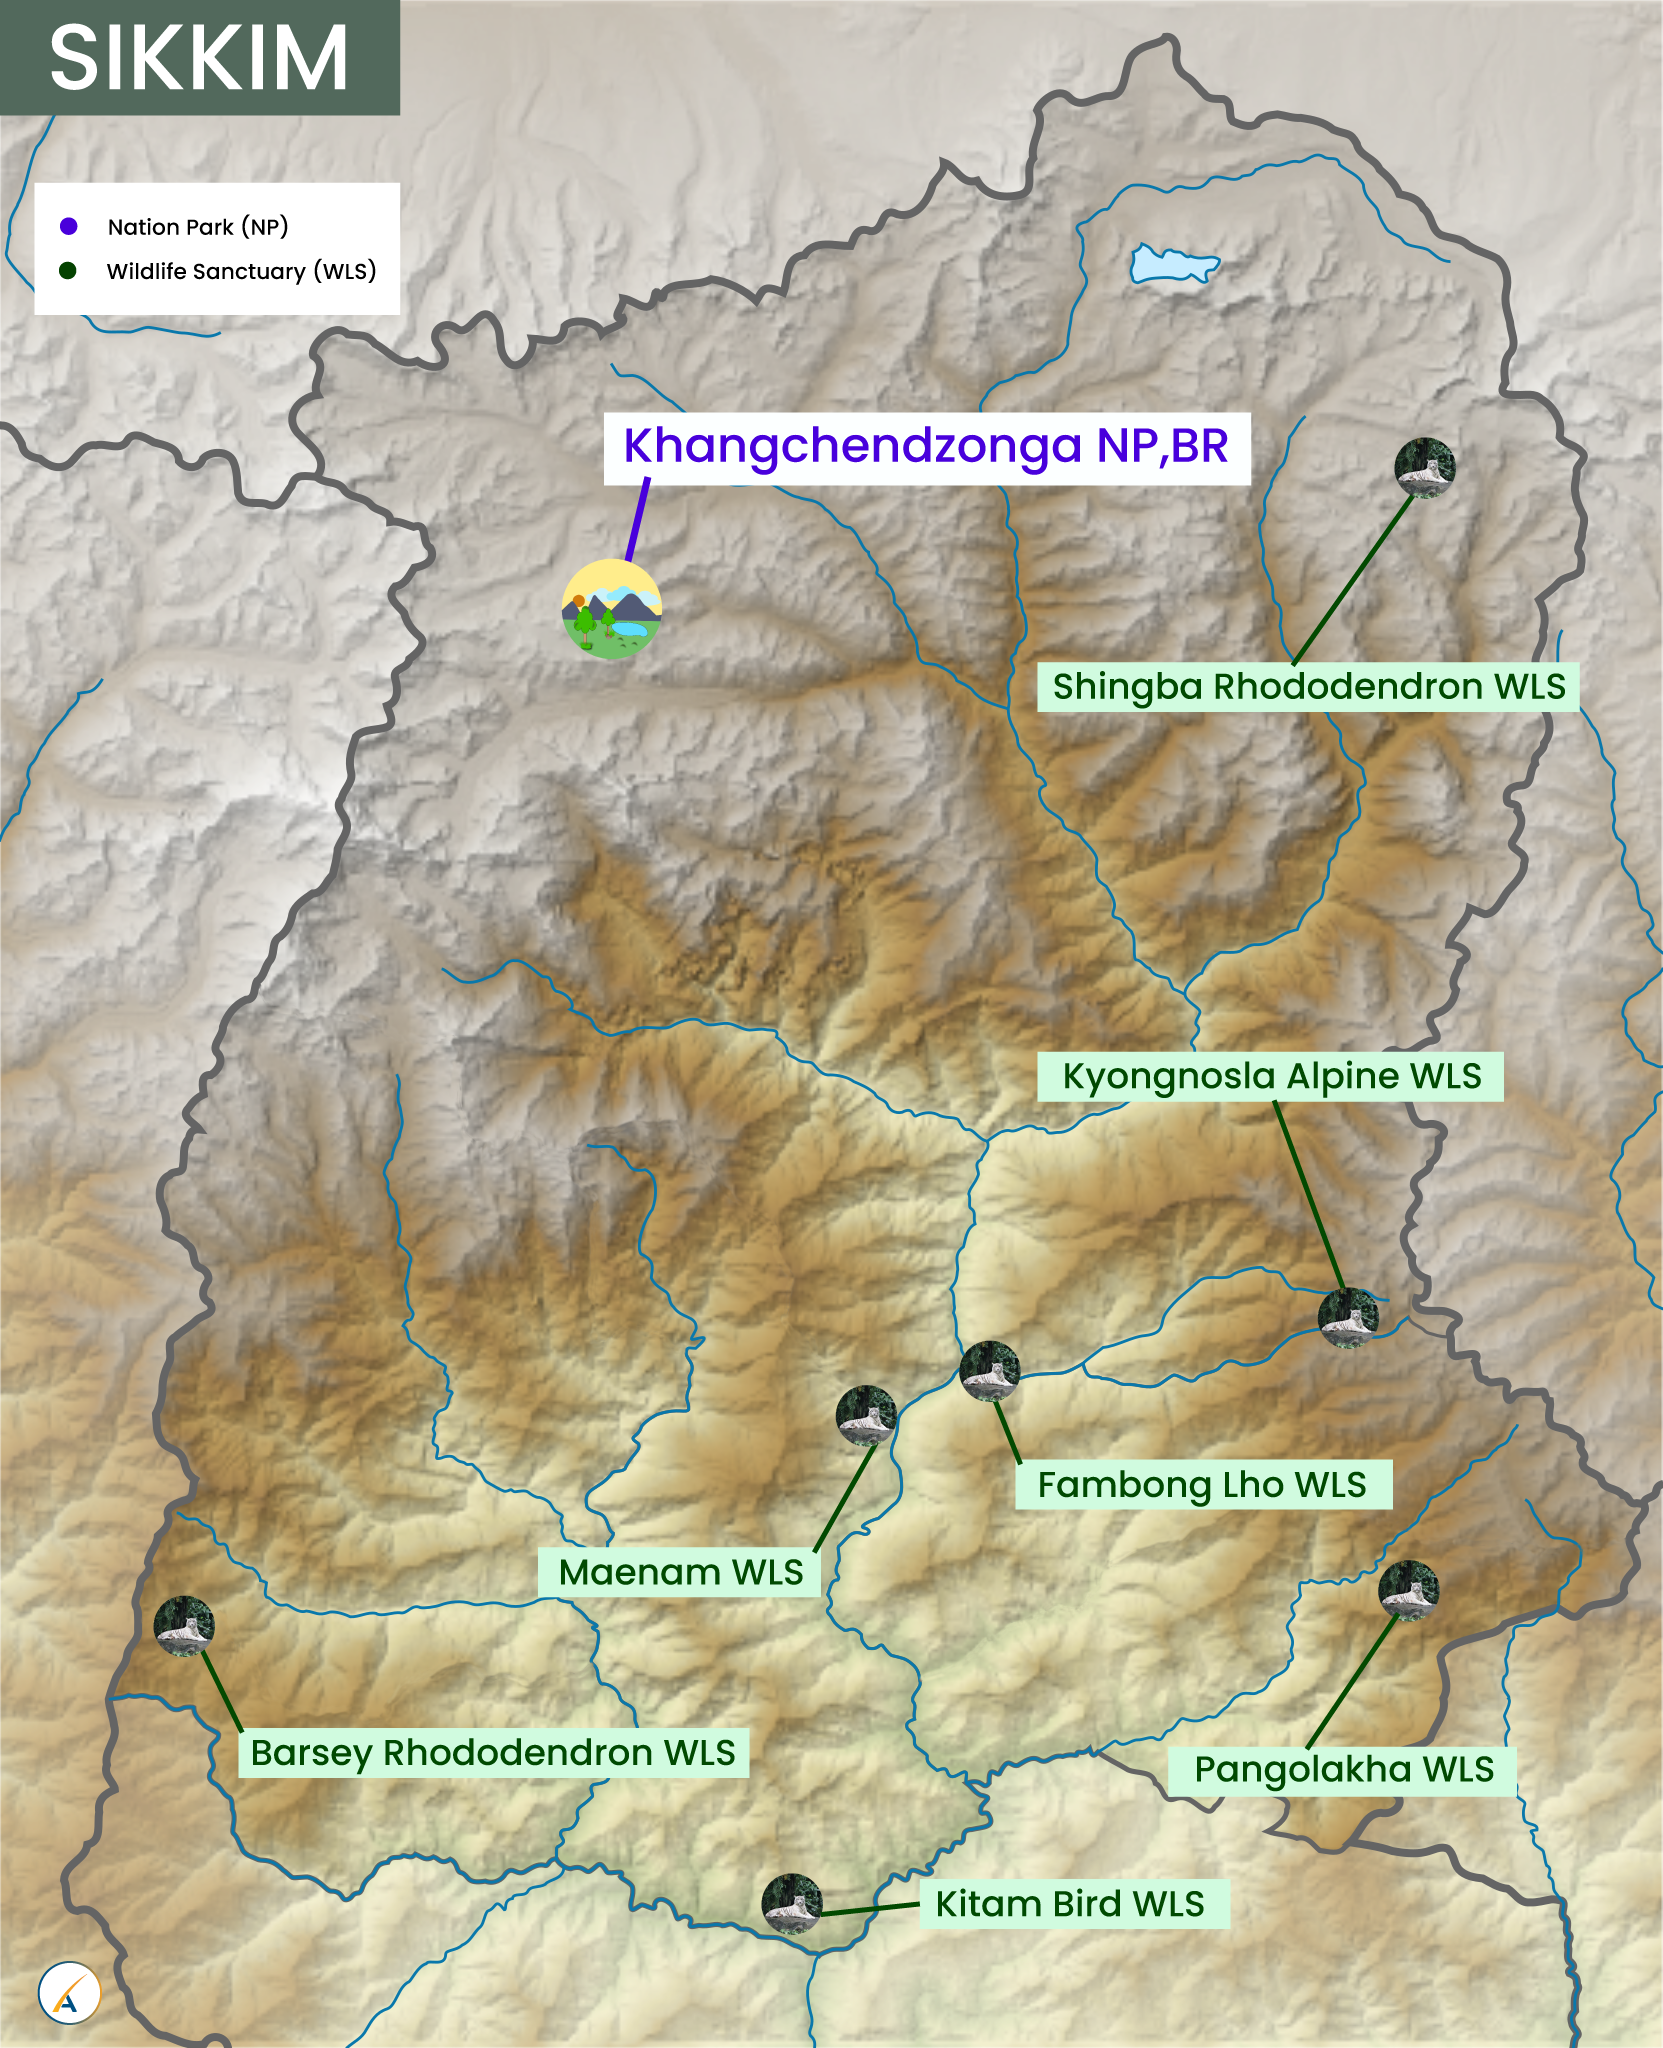 Sikkim National Parks and Wildlife Sanctuaries Map